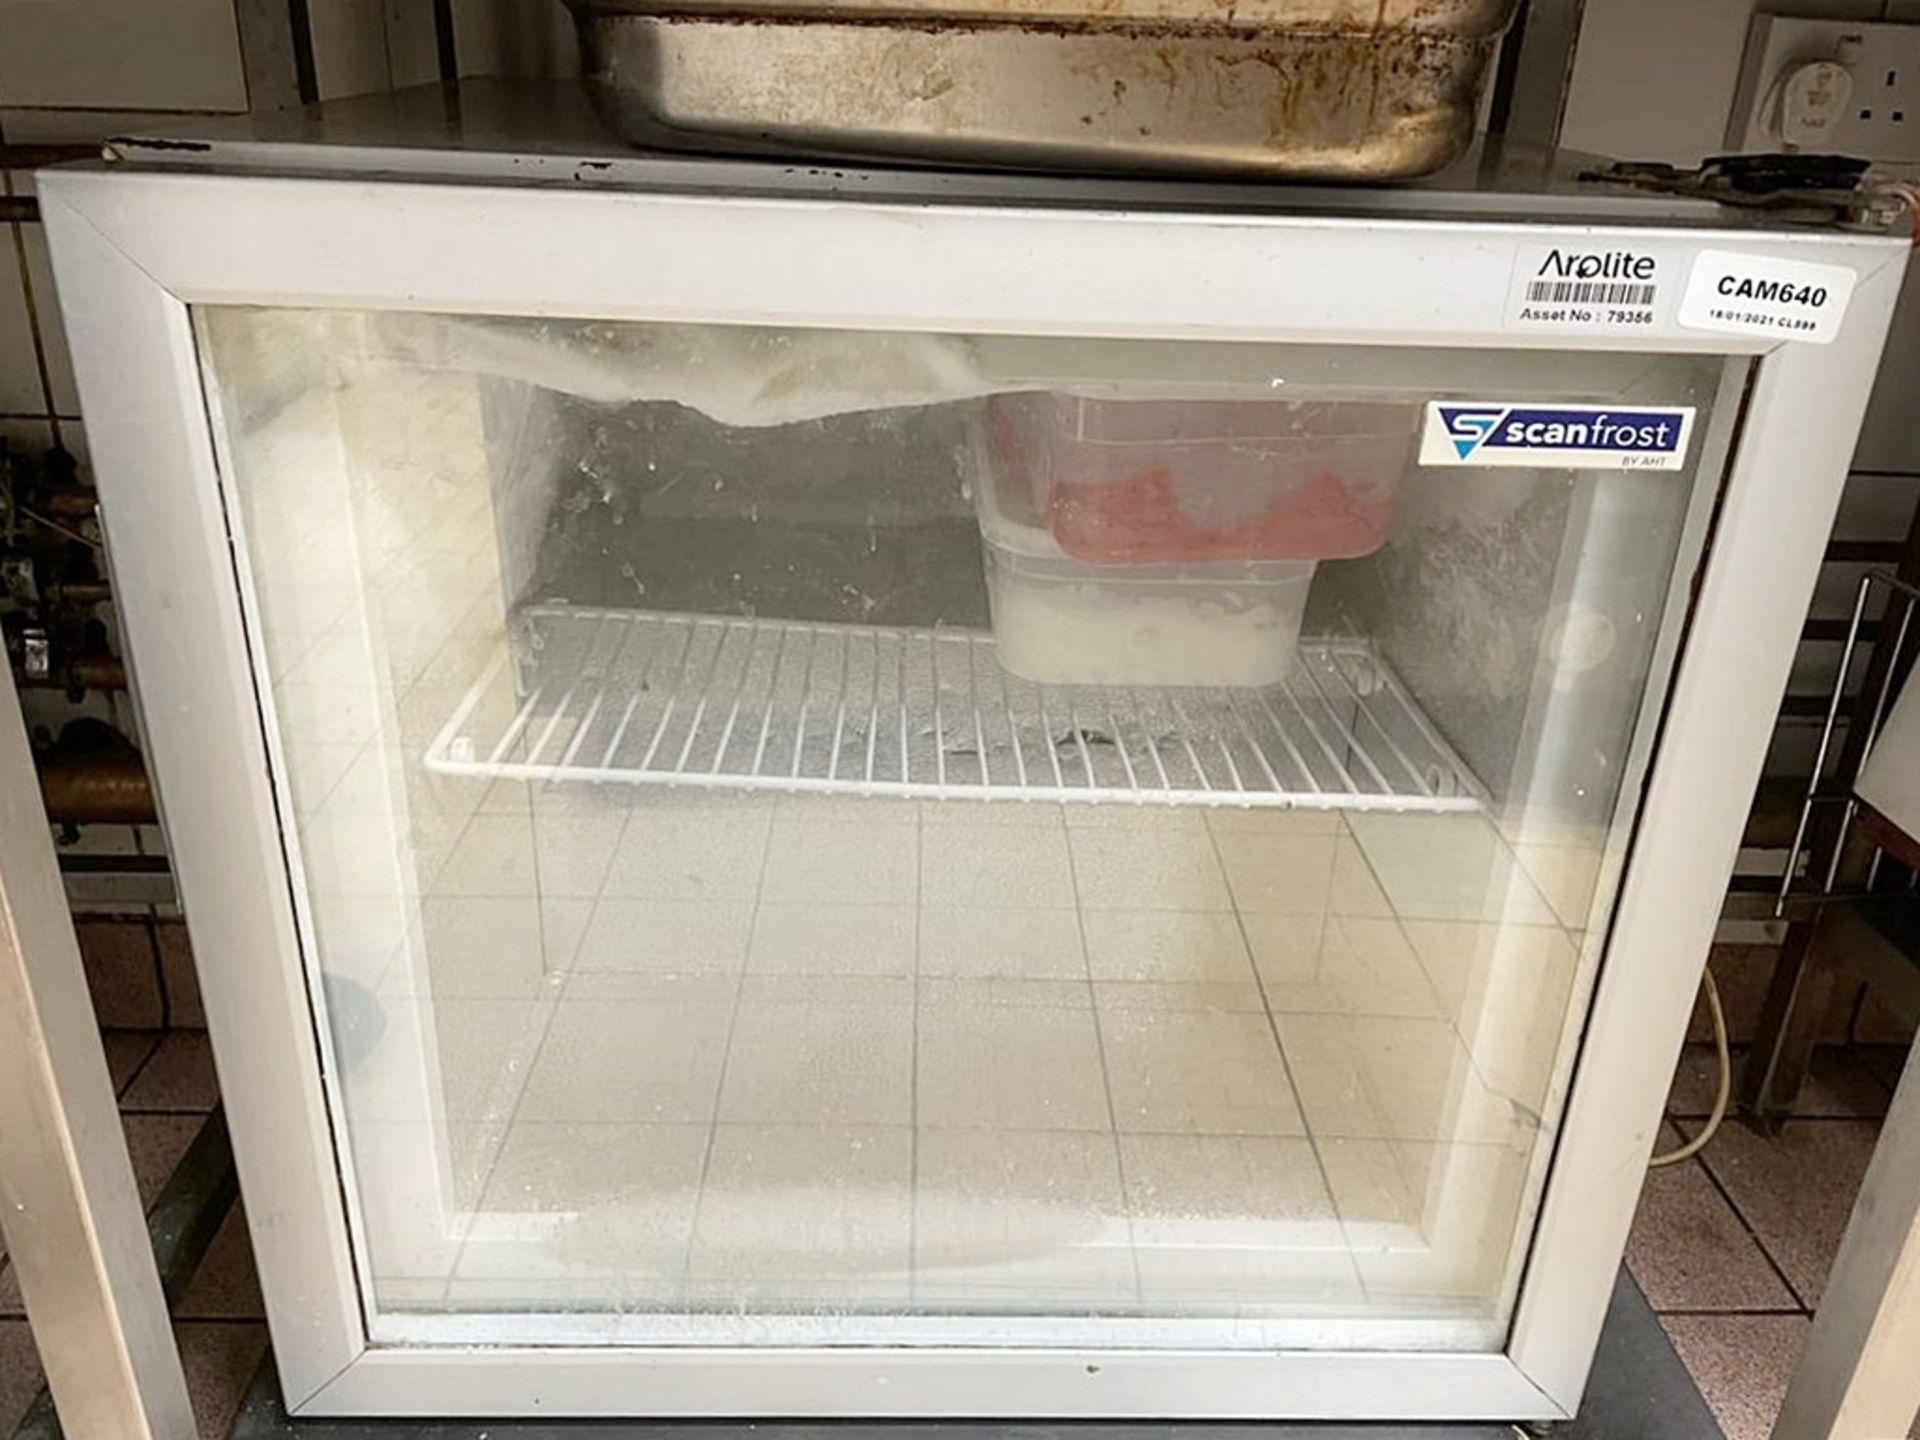 1 x SCAN FROST Commercial Undercounter Freezer - Ref: CAM640 - CL612 - Location: London SW1PThis